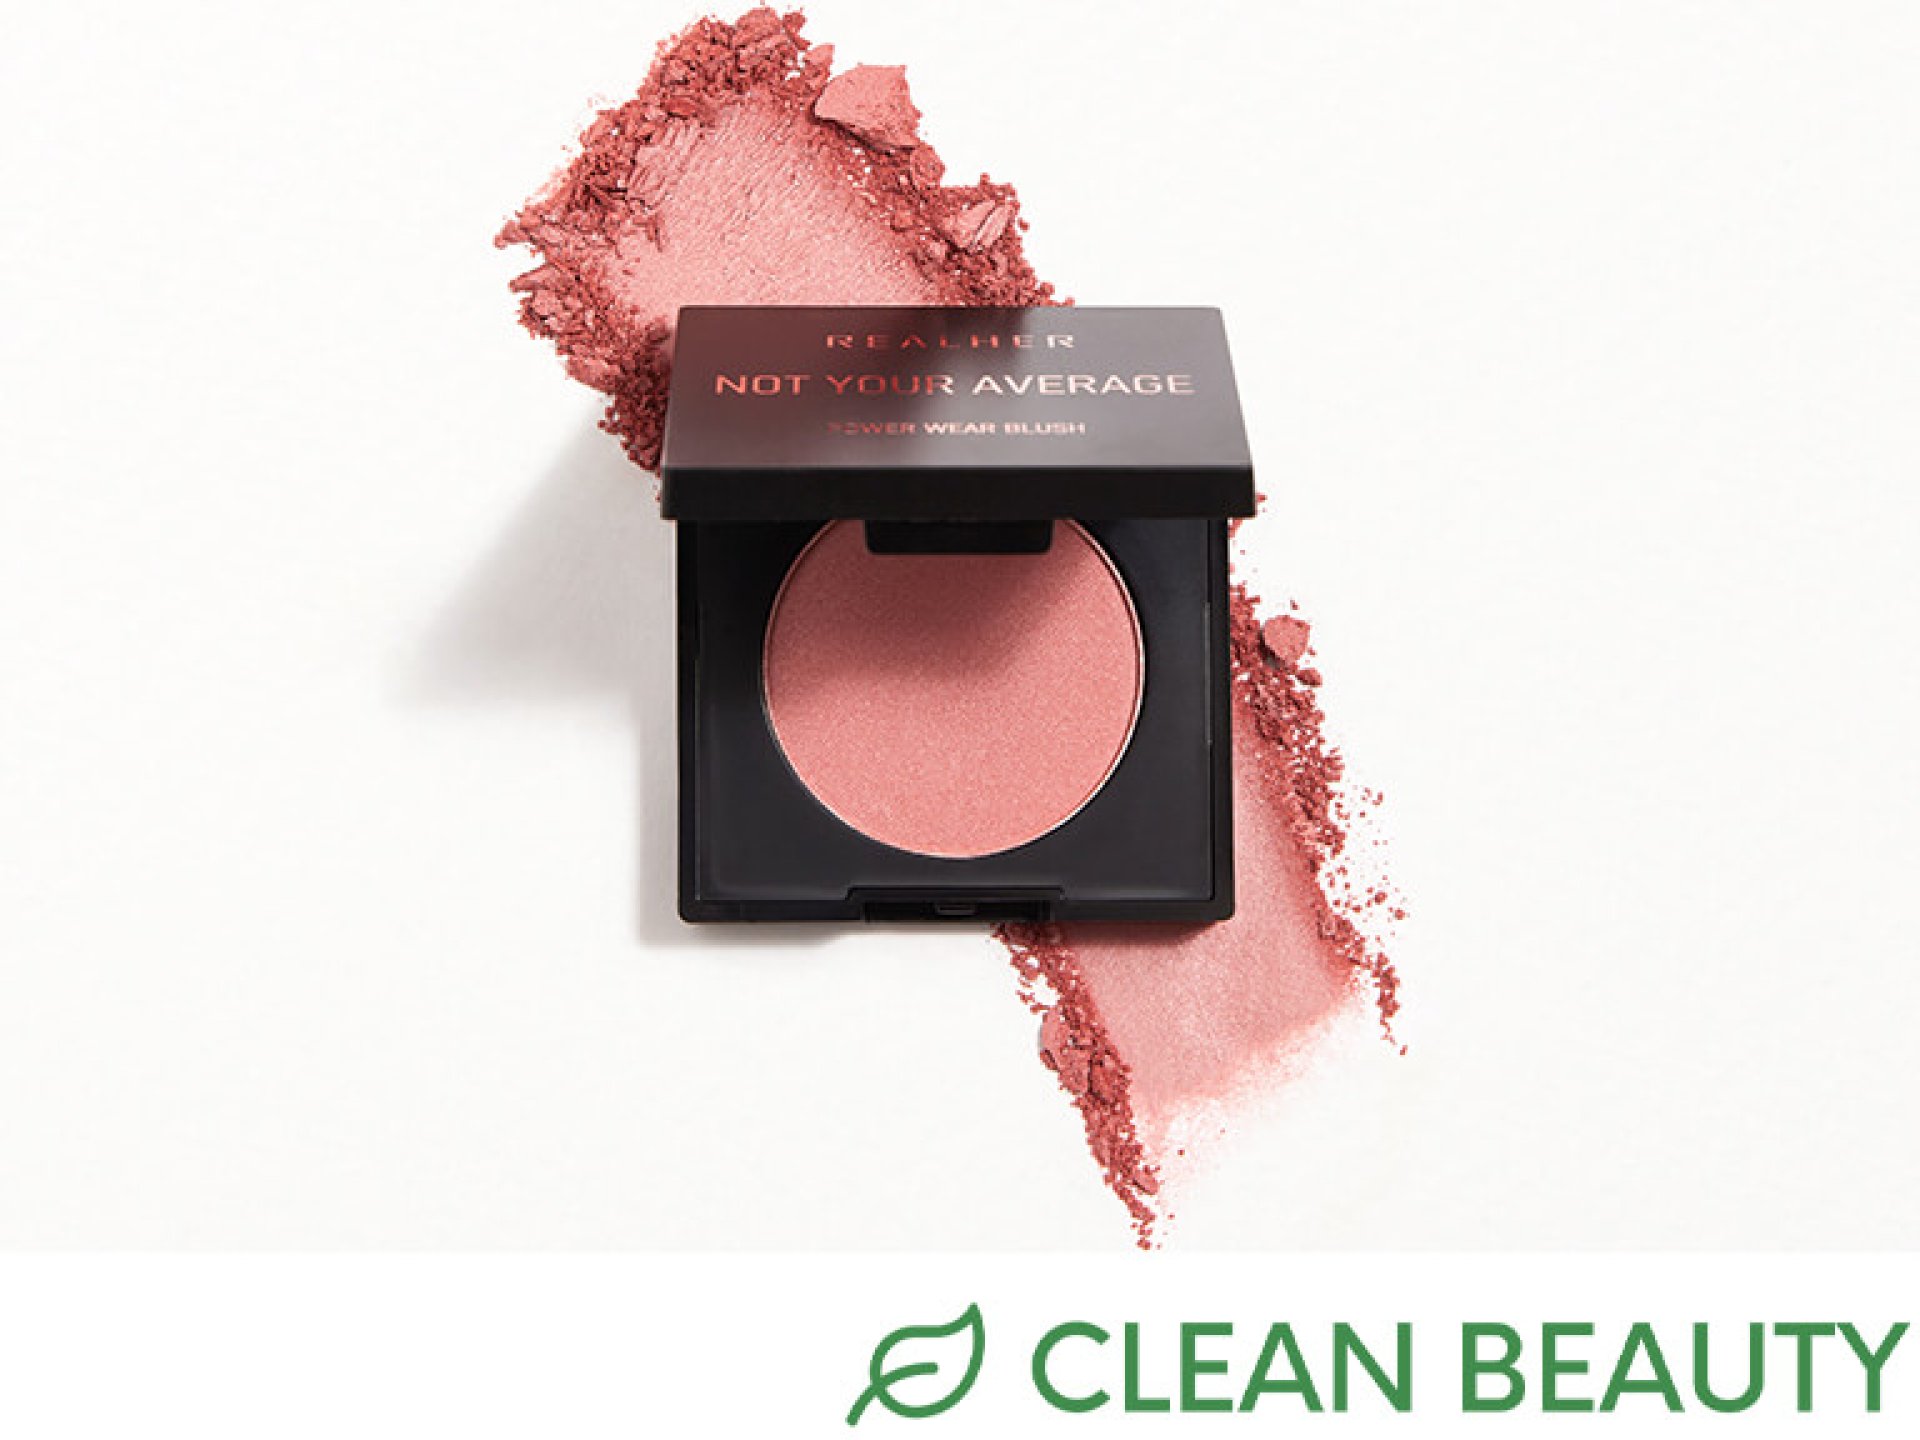 REALHER Power Wear Blush in Not Your Average